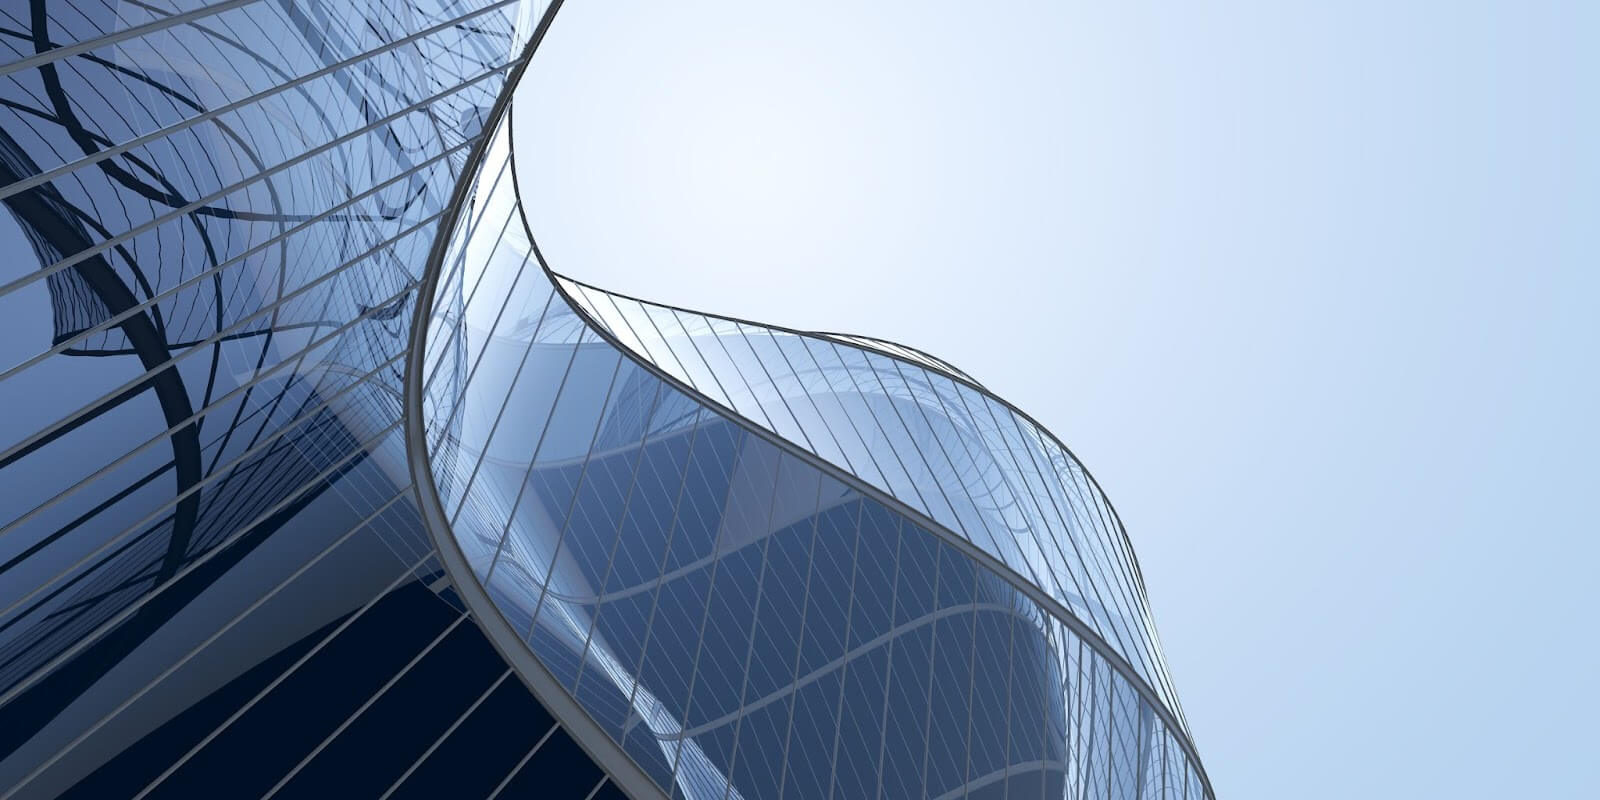 The glass roof of a unique commercial building weaves in an S-like motion.